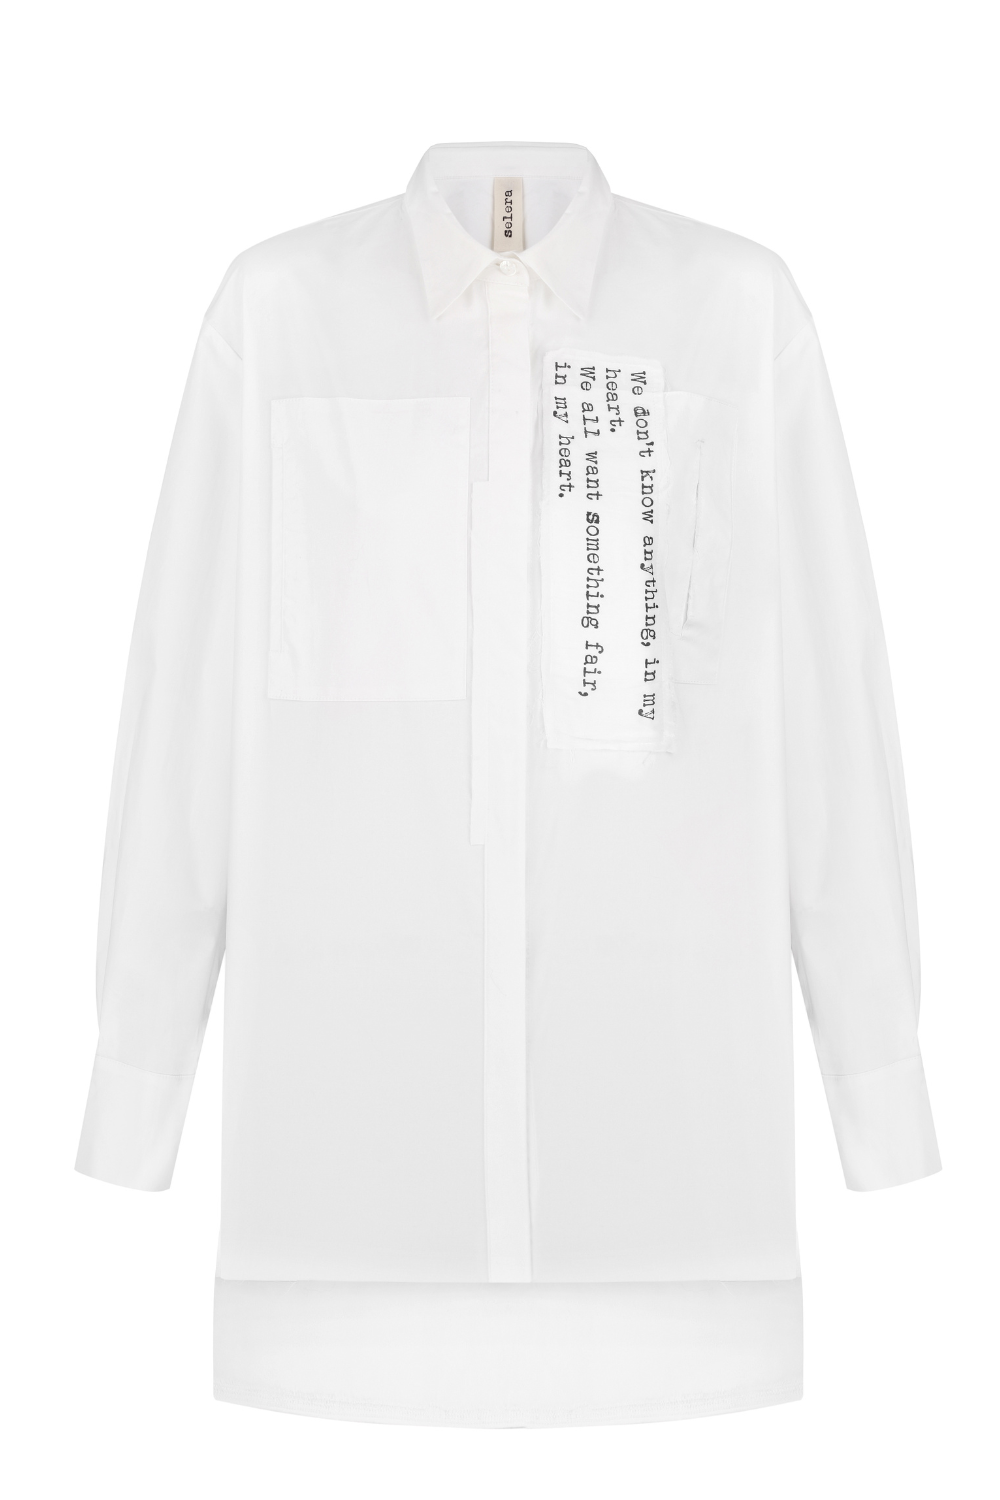 Cotton shirt with lettering (SELERA) SLR_FW23_5_